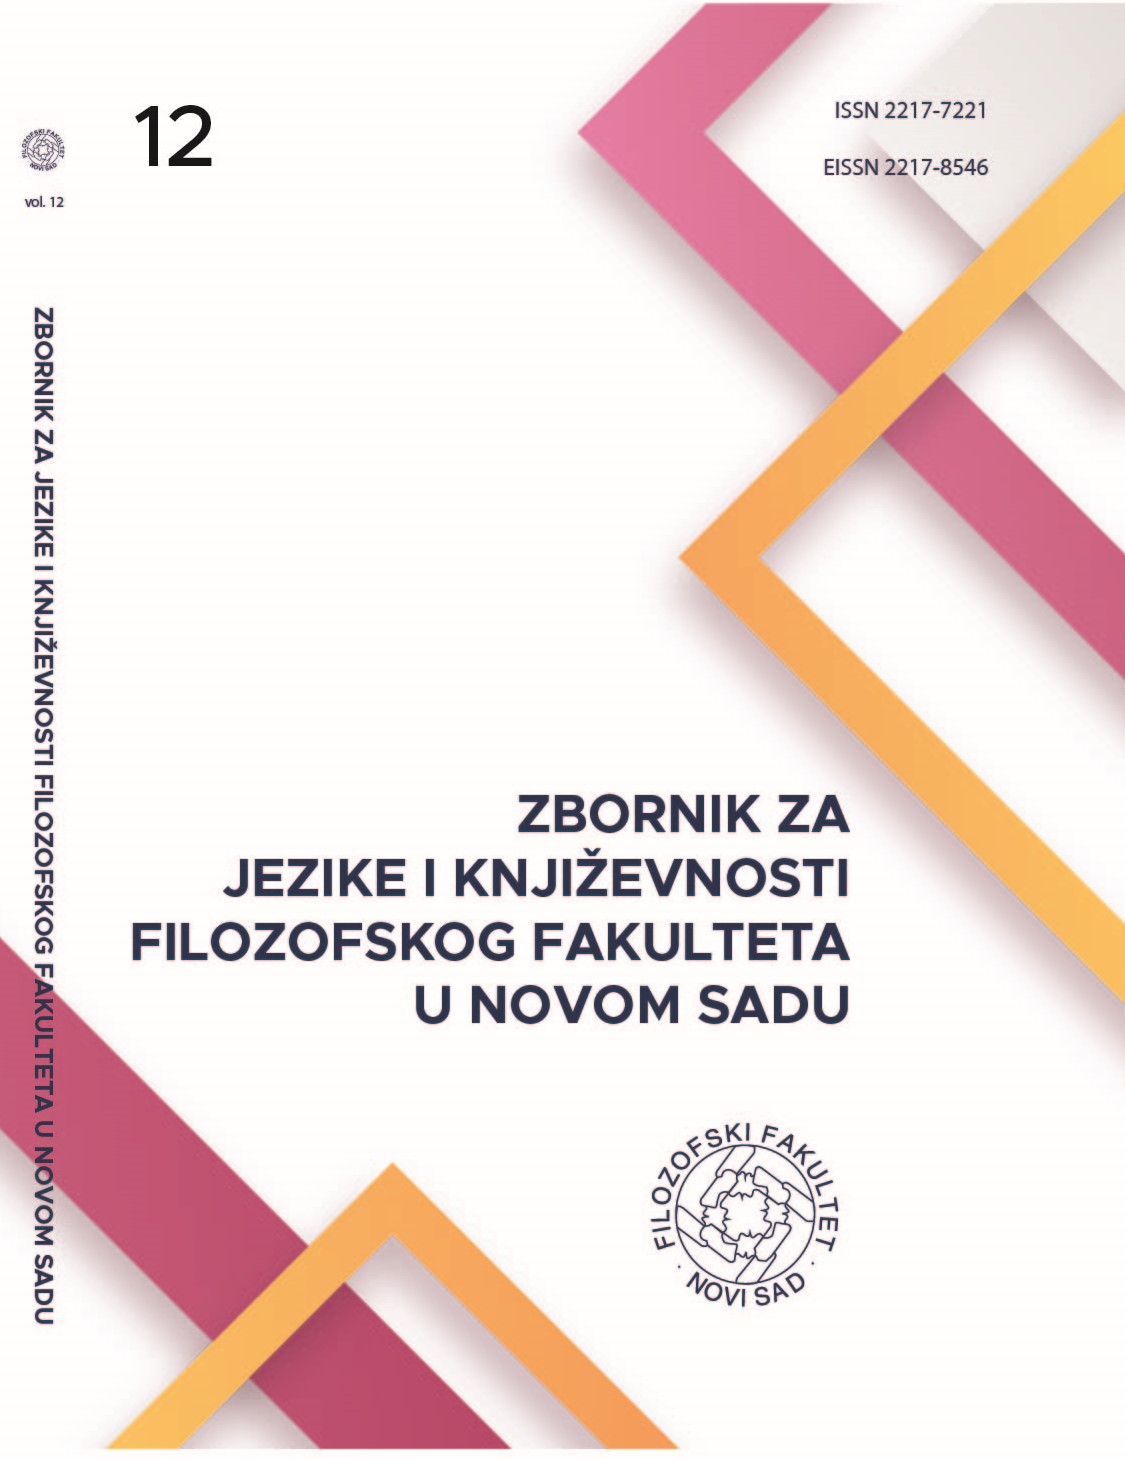 BIBILOGRAPHY OF DUŠAN KOVAČEVIĆ’S WORK WITH AN CHRONOLOGICAL
OVERVIEW OF THE THEATRE PREMIERES Cover Image